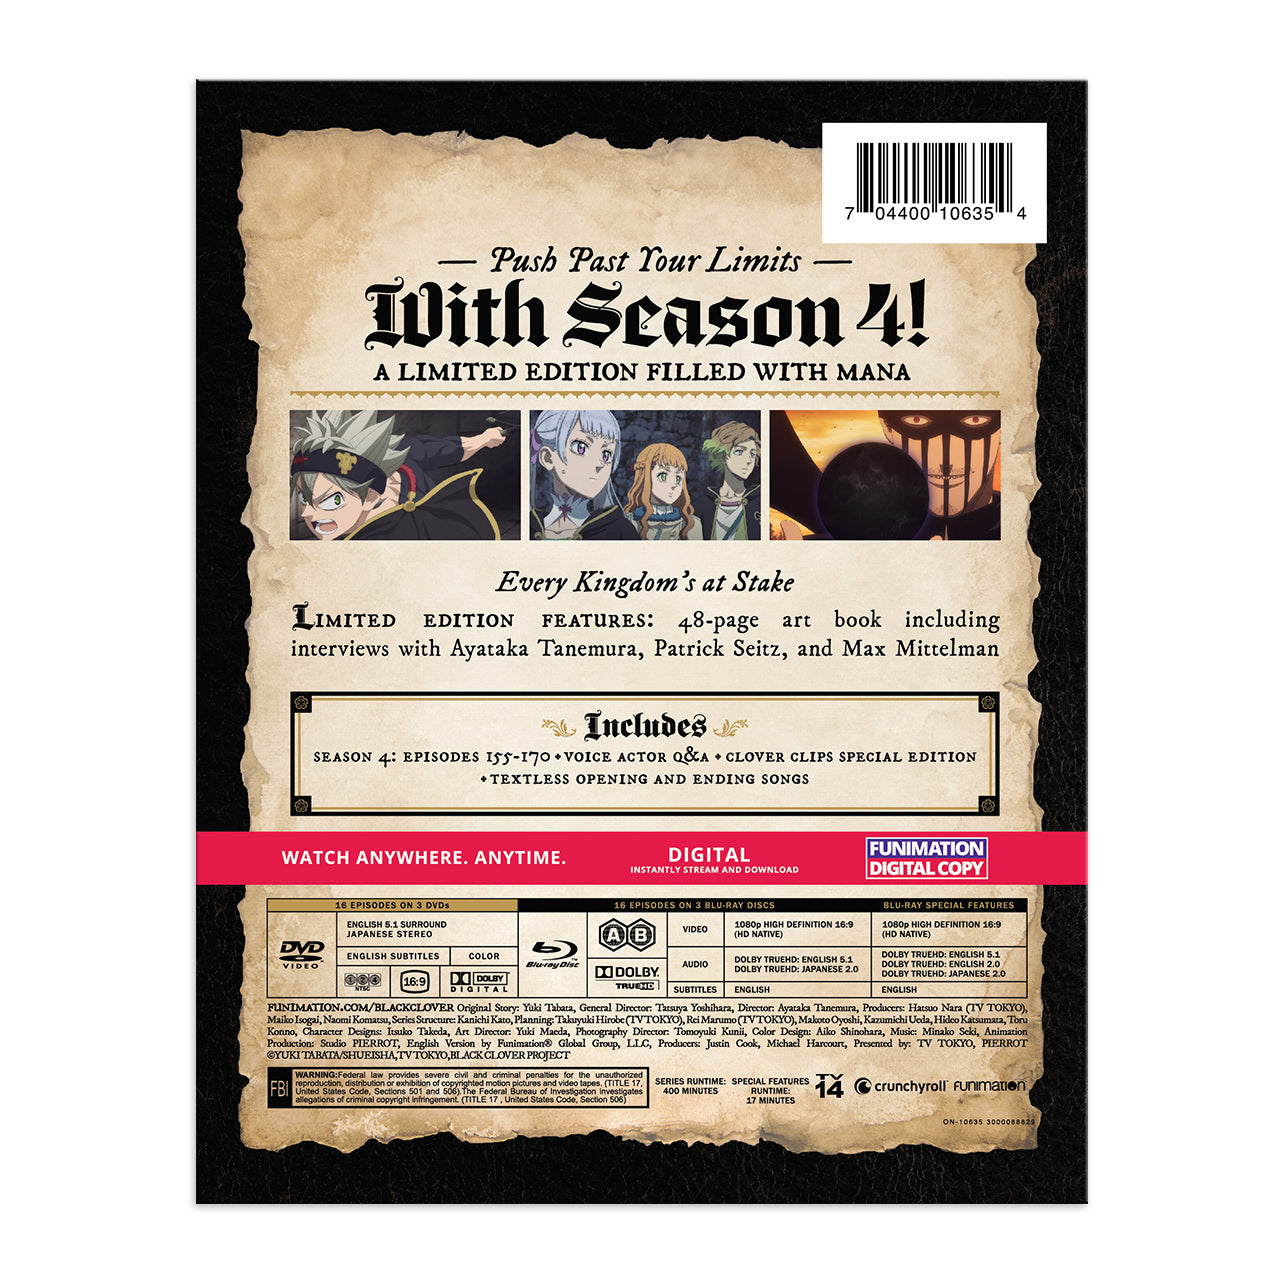 Black Clover - Season 4 - Limited Edition - Blu-ray + DVD image count 7